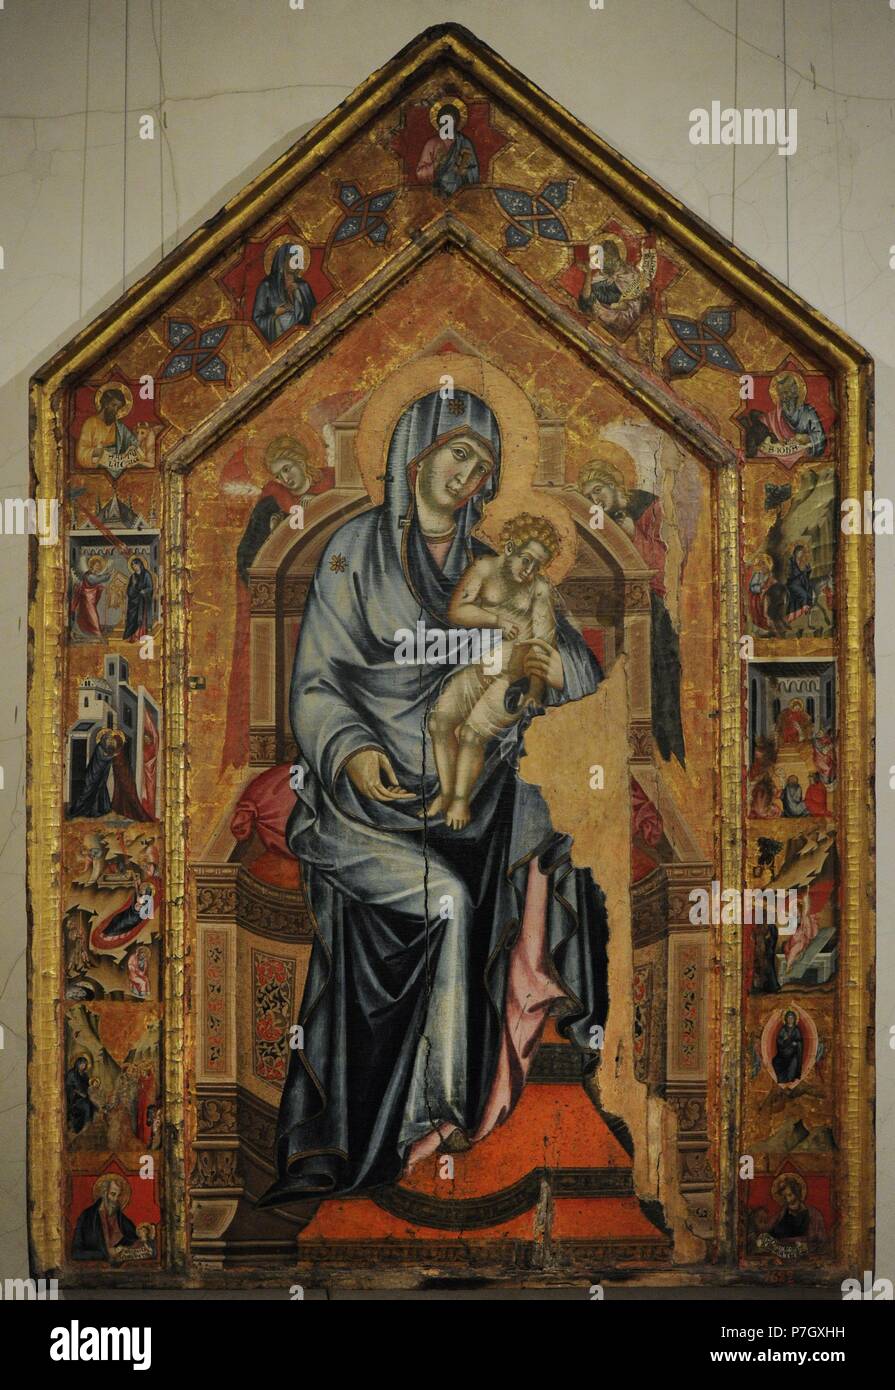 Siena artist of 14th century. Madonna and Child Enthroned with hagiographical scenes in stamps, 1320-1325. Tempera on panel. The State Hermitage Museum. Saint Petersburg. Russia. Stock Photo